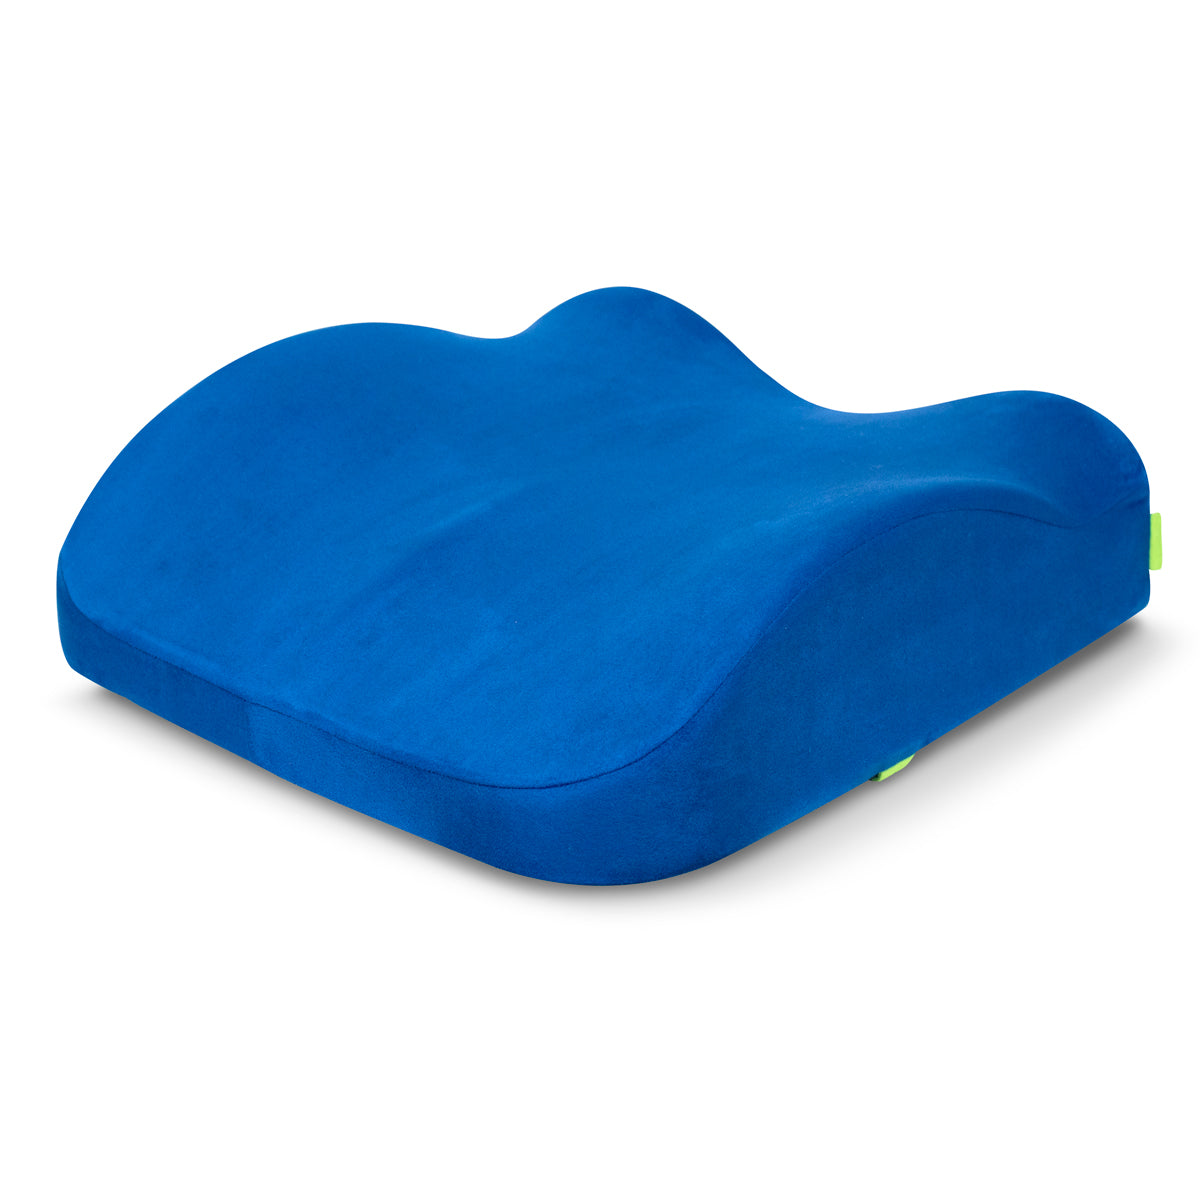 Memory Foam Office or Wheelchair Cushion for Oversized Chairs